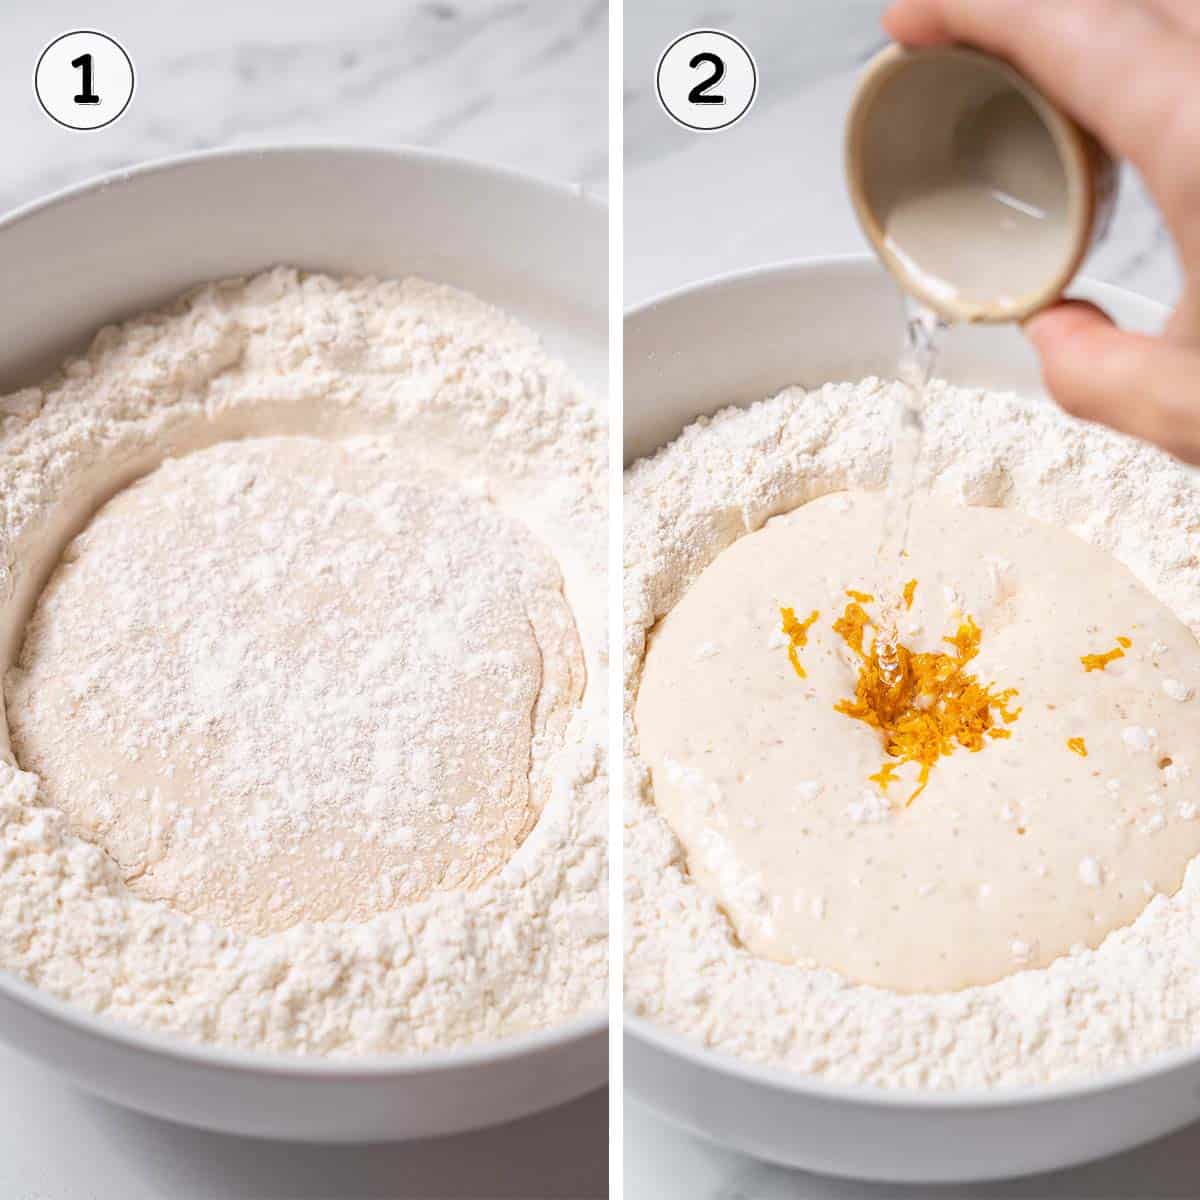 pouring the wet ingredients into the bowl of flour.